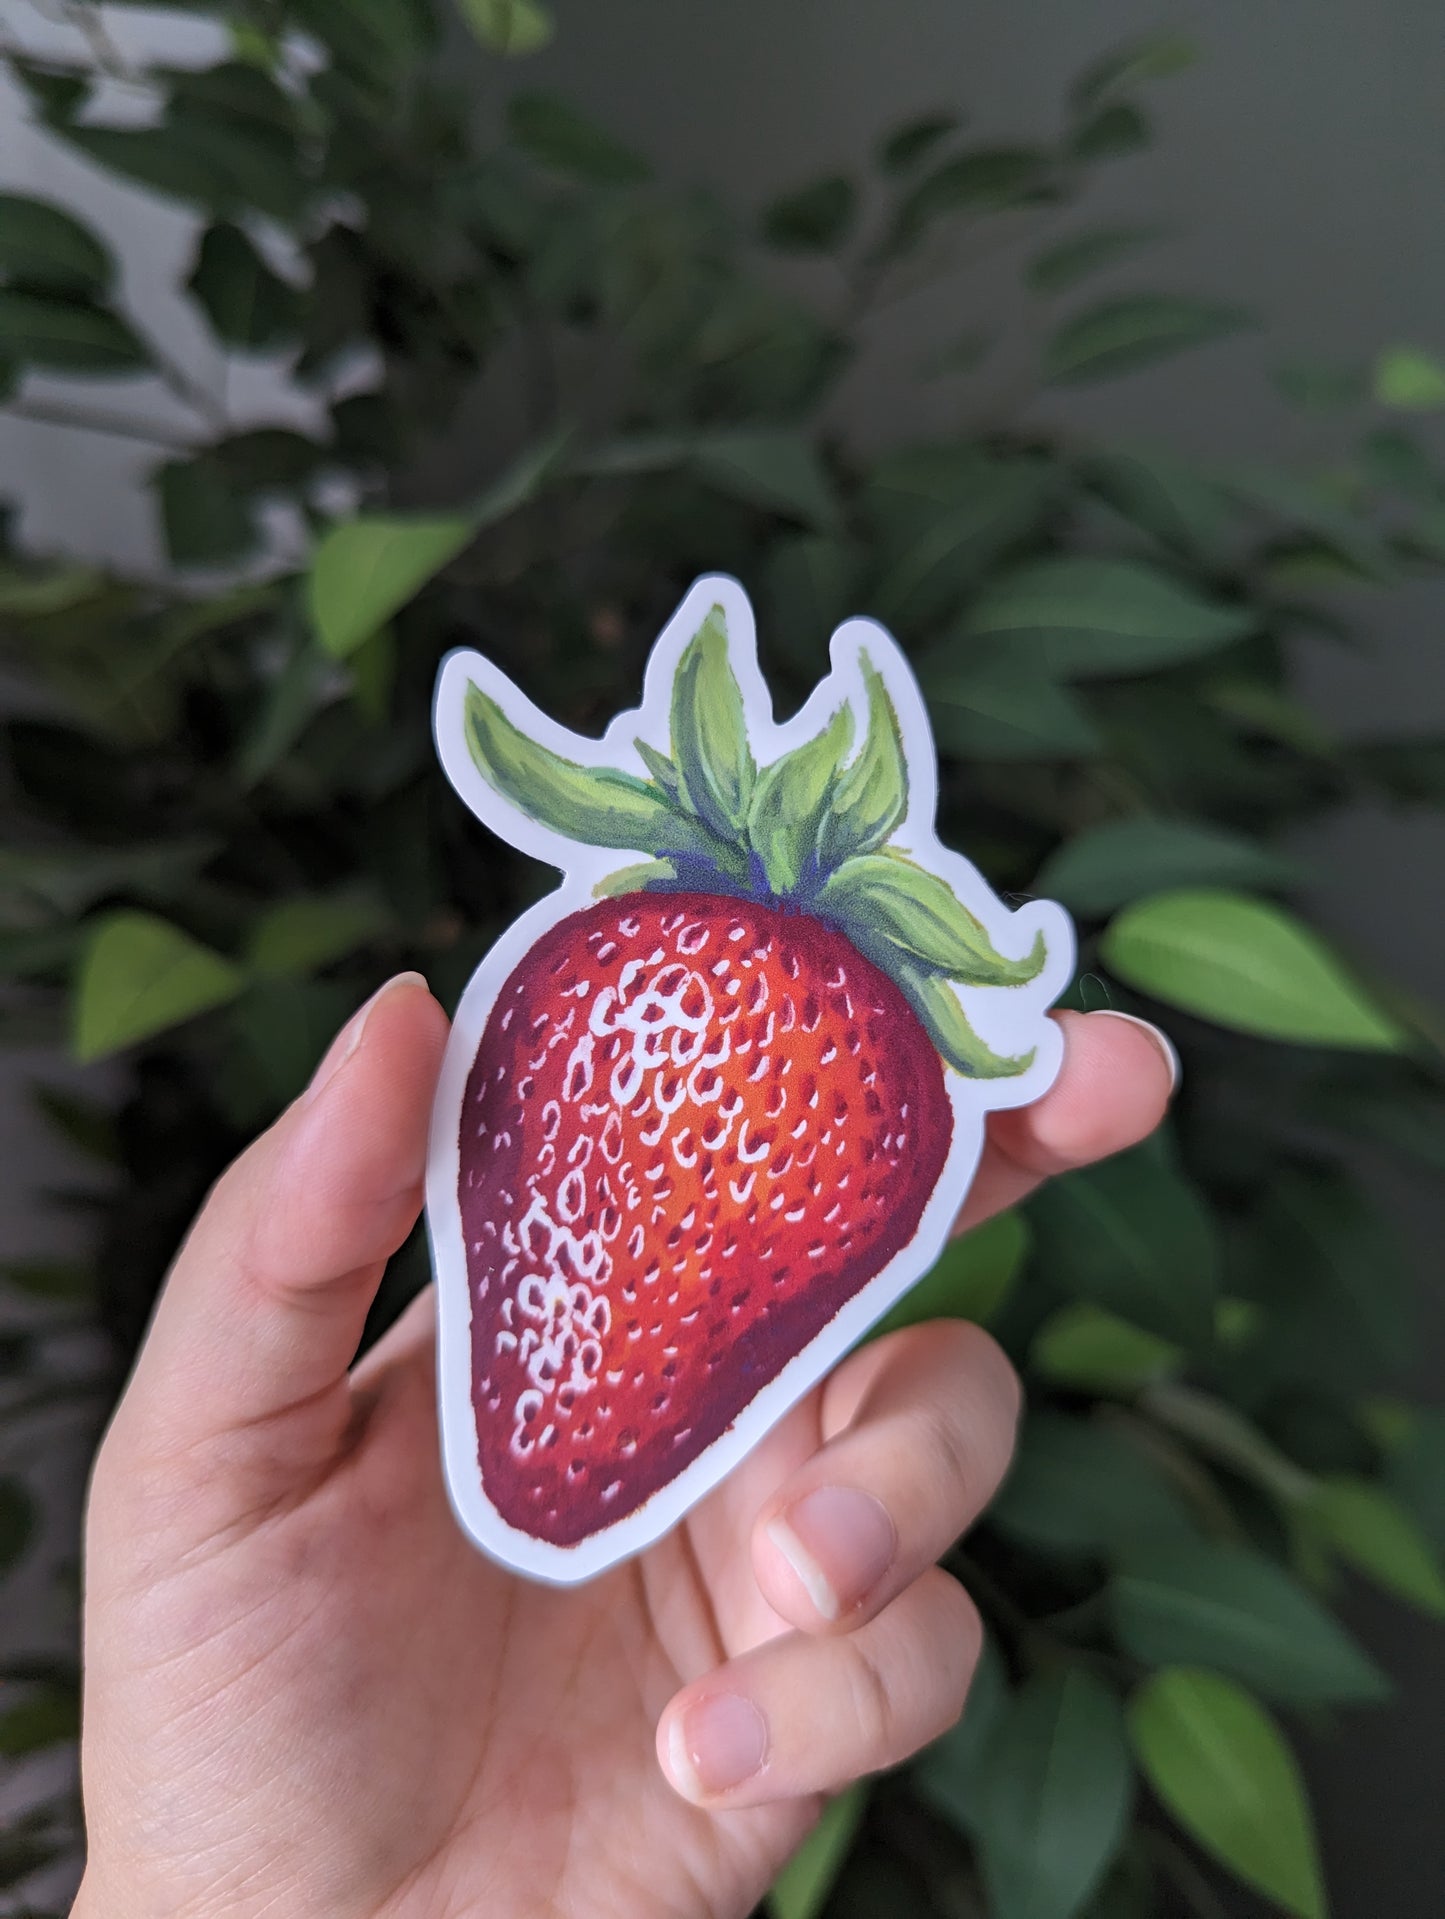 Fruit Stickers & Magnets